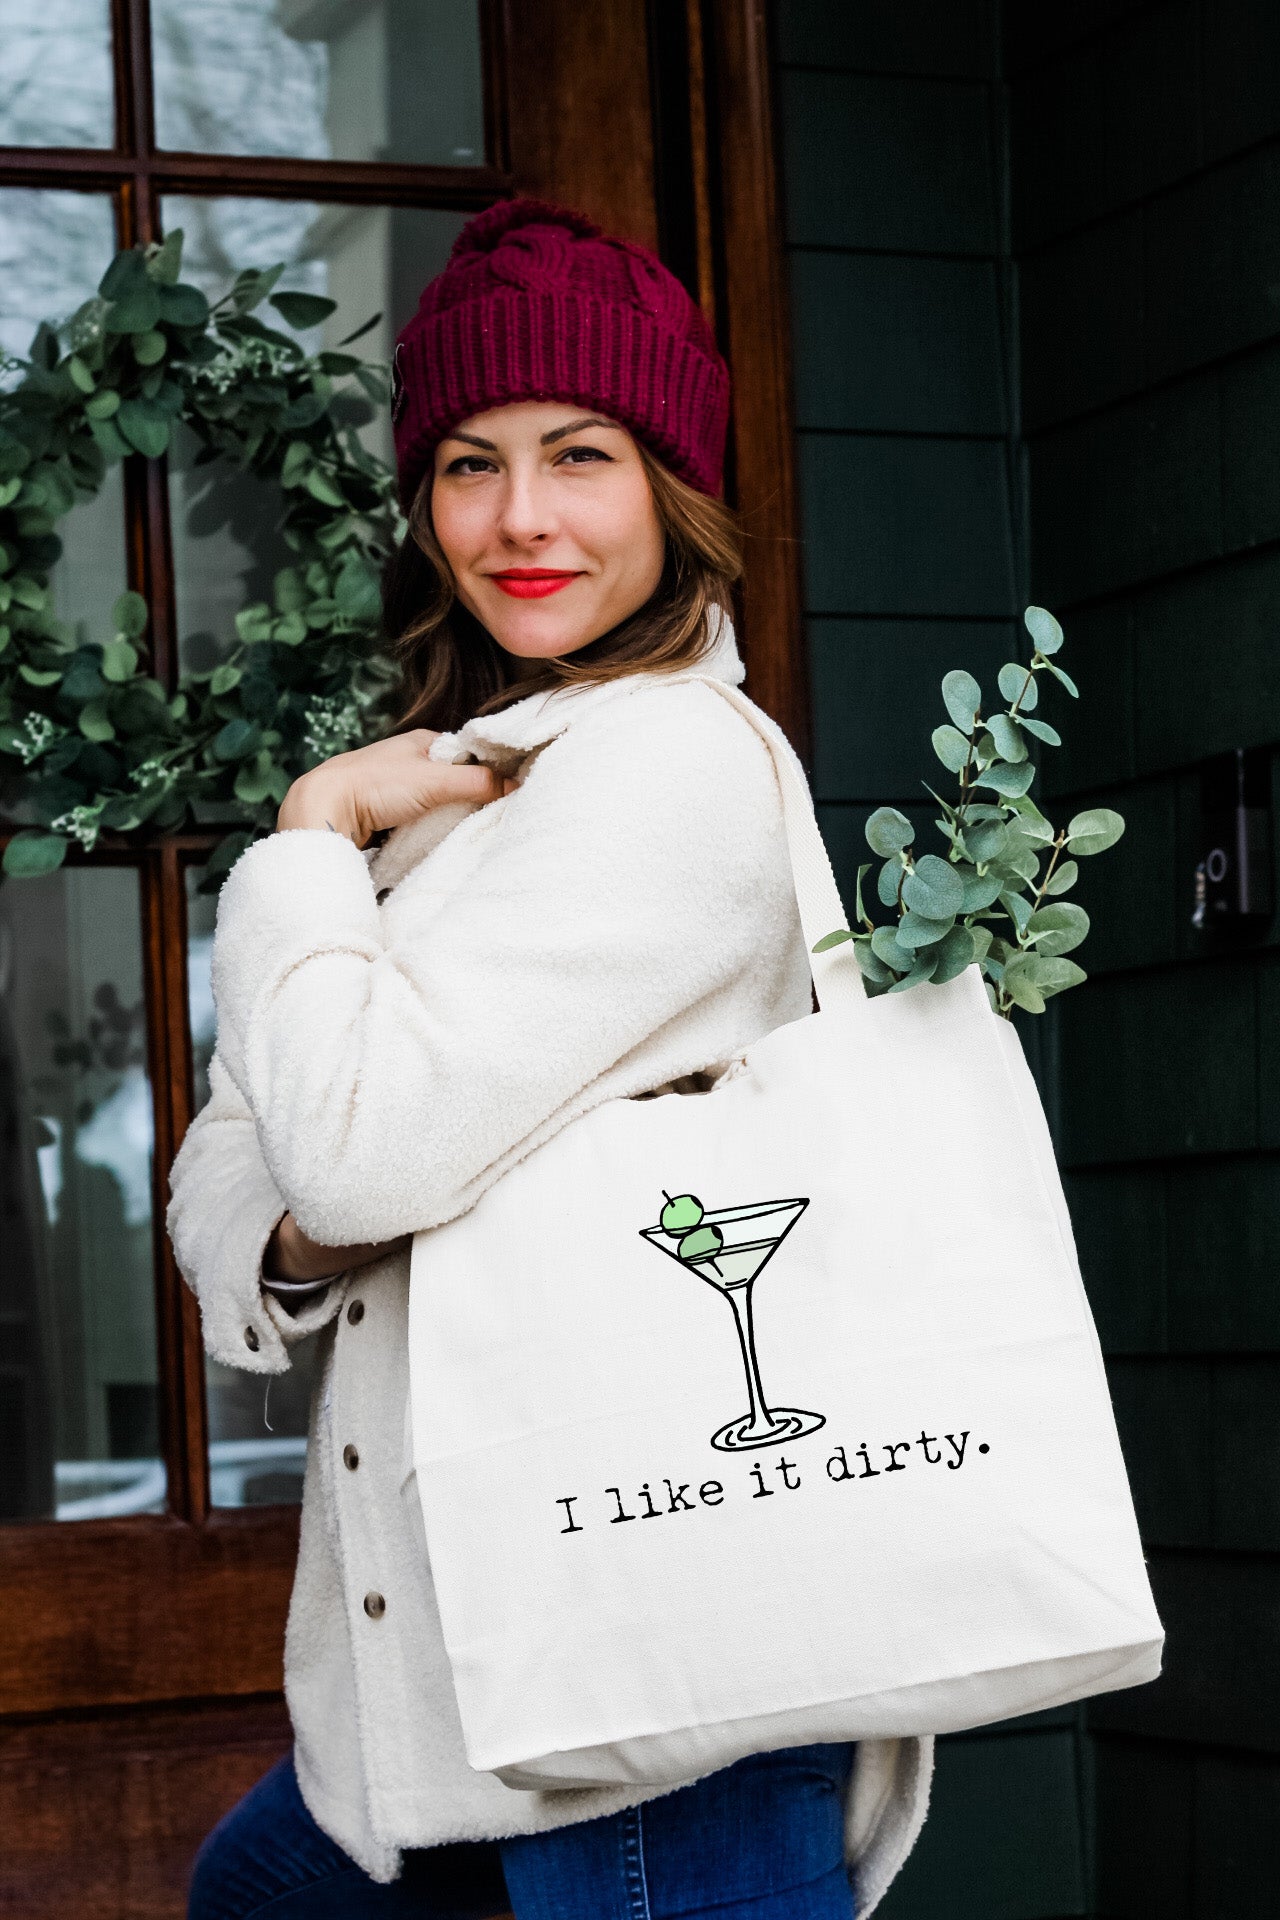 a woman carrying a white bag that says i like it dirty